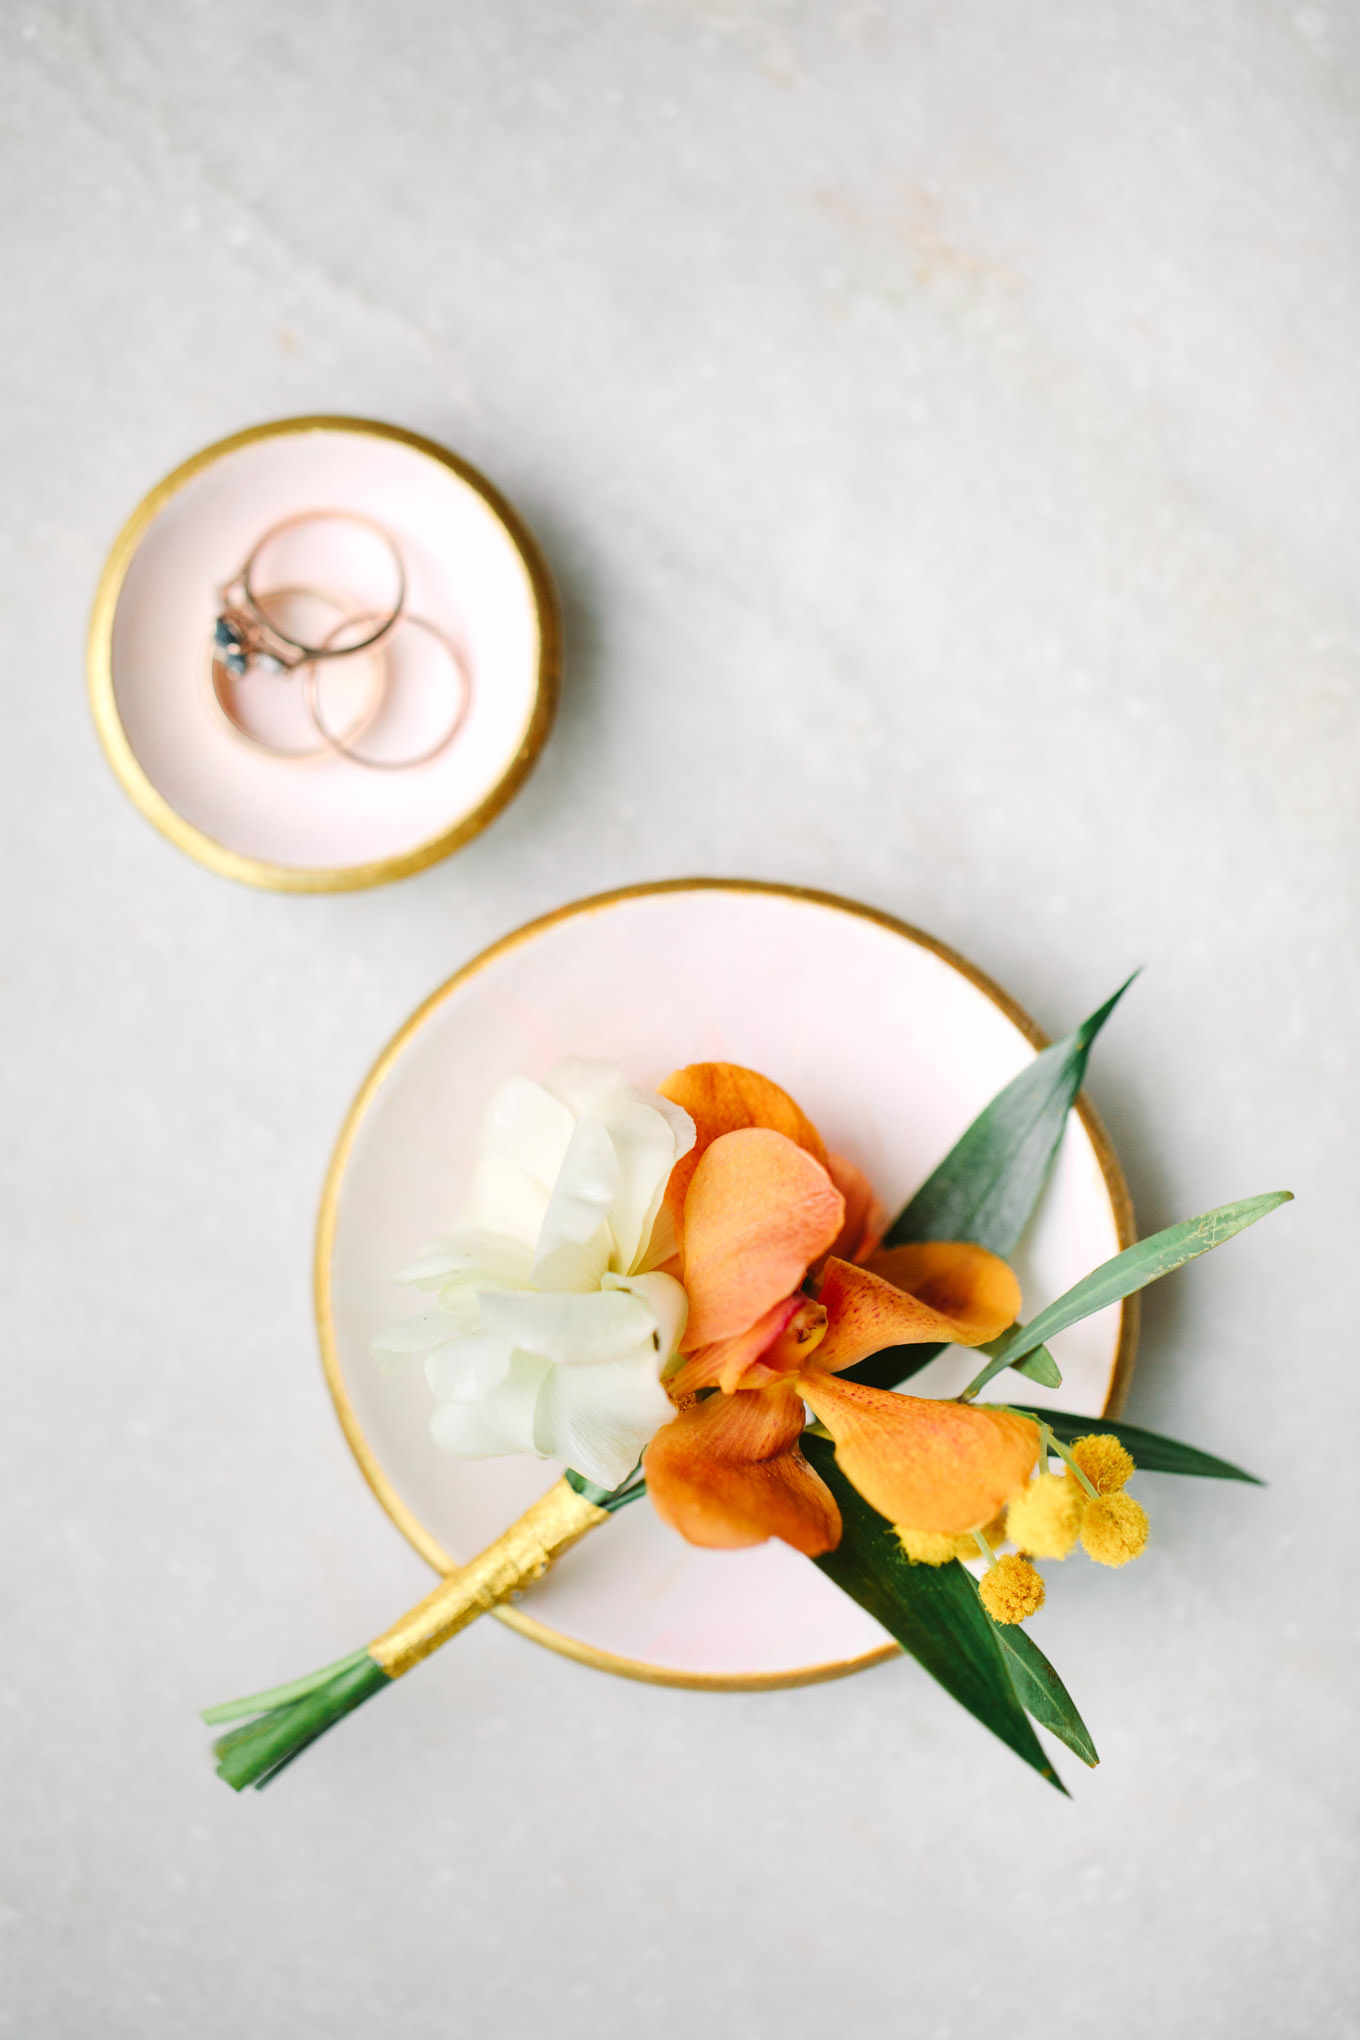 Tropical boutonniere | TV inspired wedding at The Fig House Los Angeles | Published on The Knot | Fresh and colorful photography for fun-loving couples in Southern California | #losangeleswedding #TVwedding #colorfulwedding #theknot   Source: Mary Costa Photography | Los Angeles wedding photographer